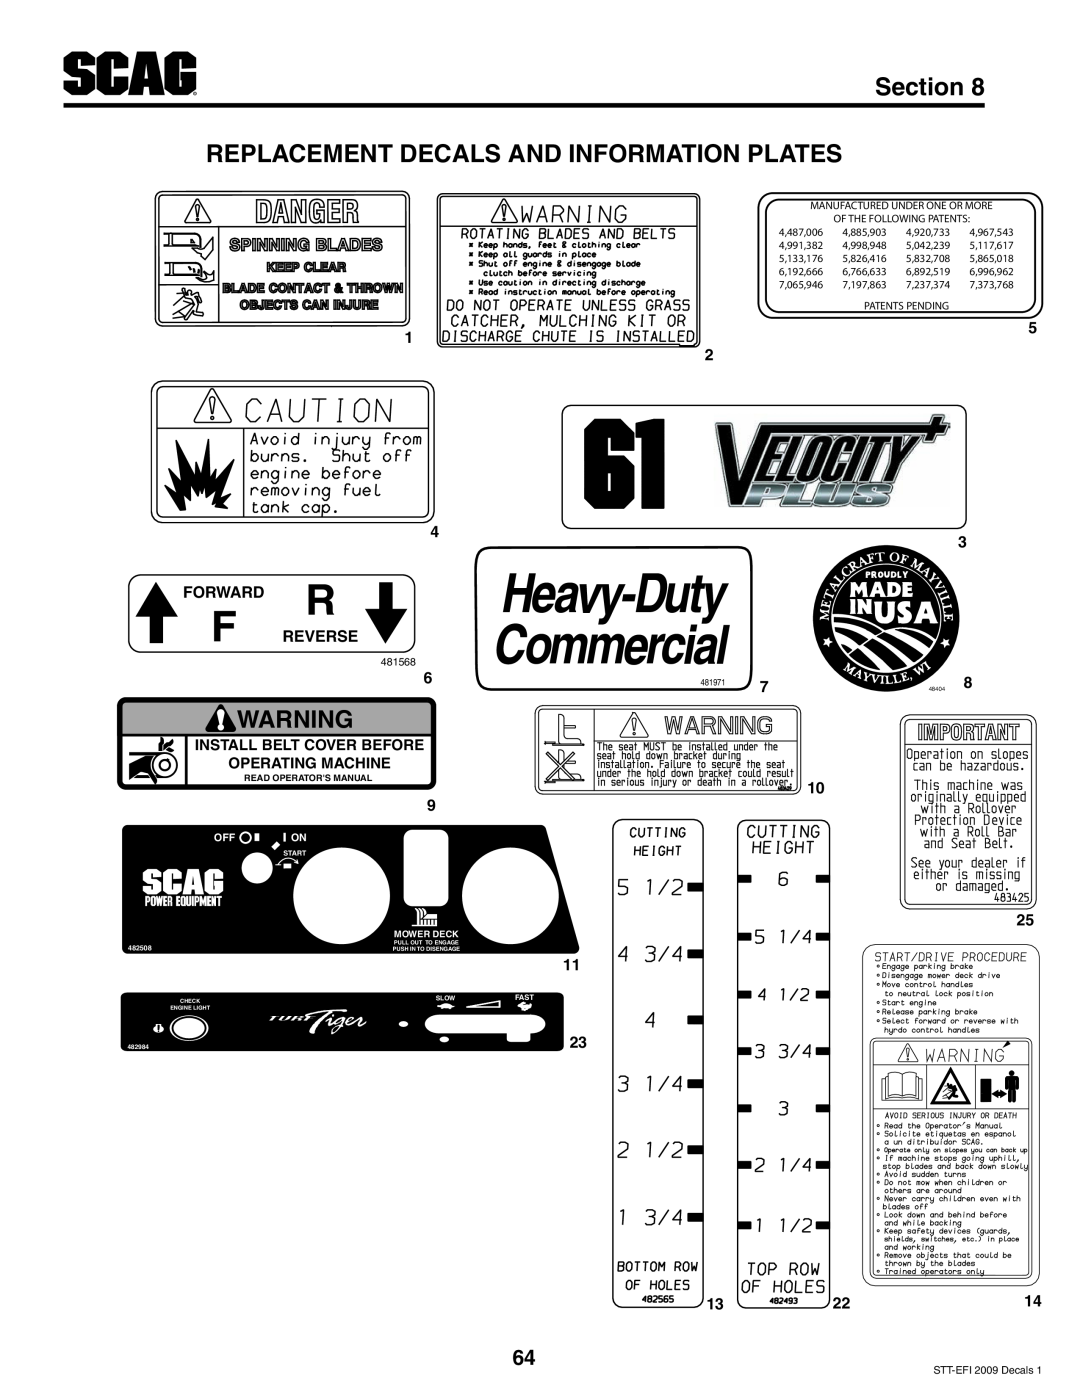 Scag Power Equipment STT-31EFI-SS Replacement Decals And Information Plates, Heavy-Duty Commercial, Section, 132214 